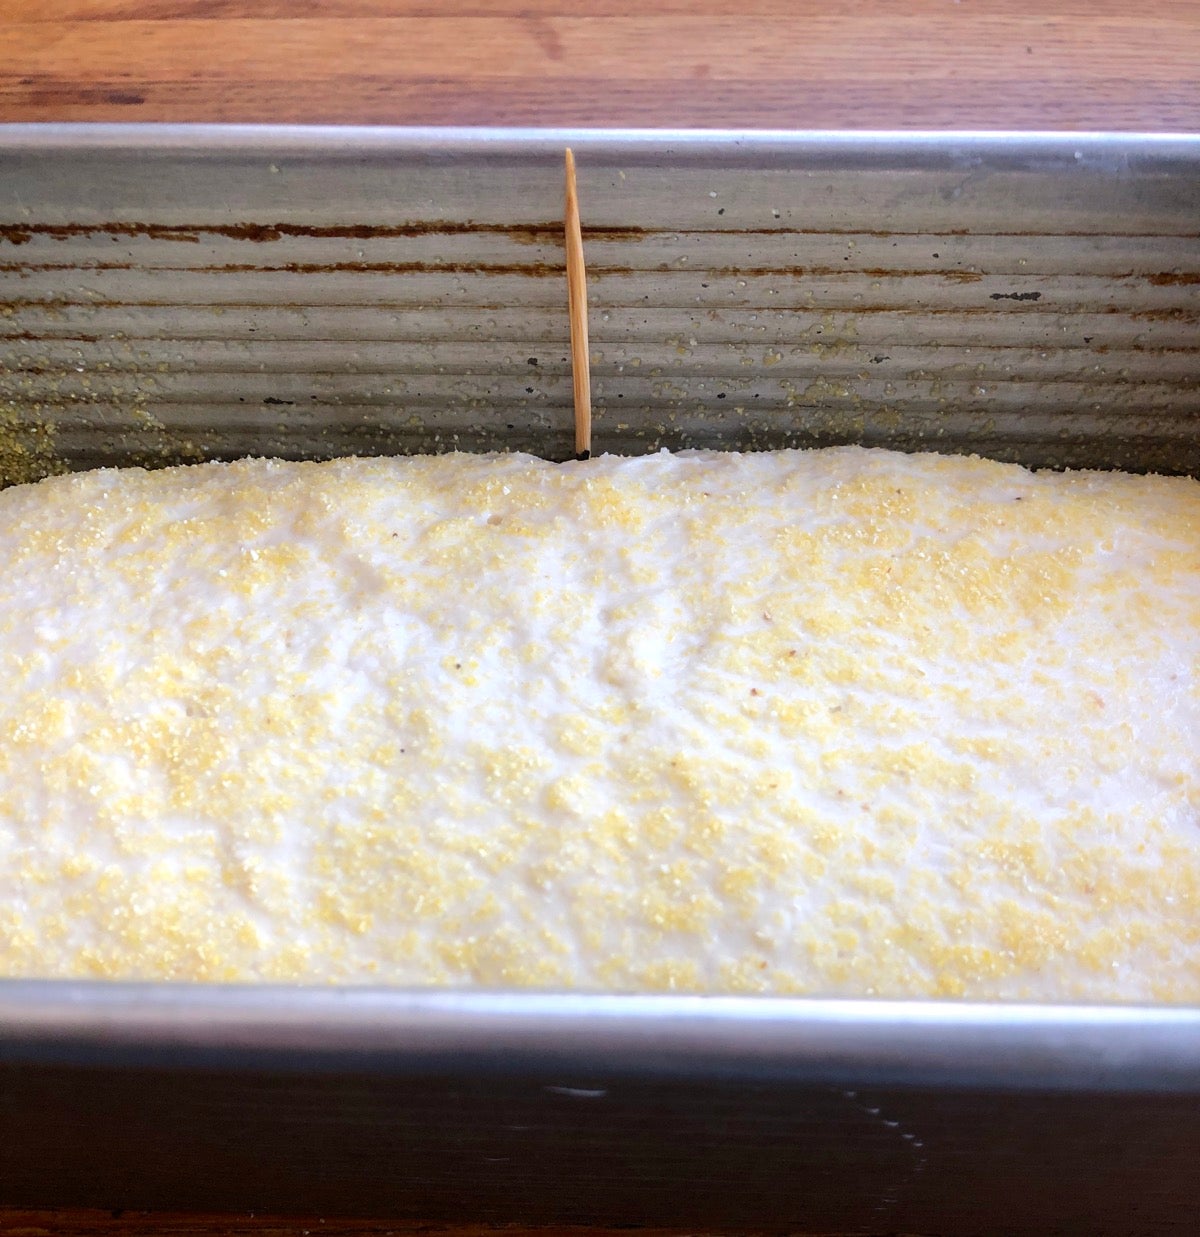 Dough rising in a loaf pan with a marked toothpick showing that it's doubled in size.